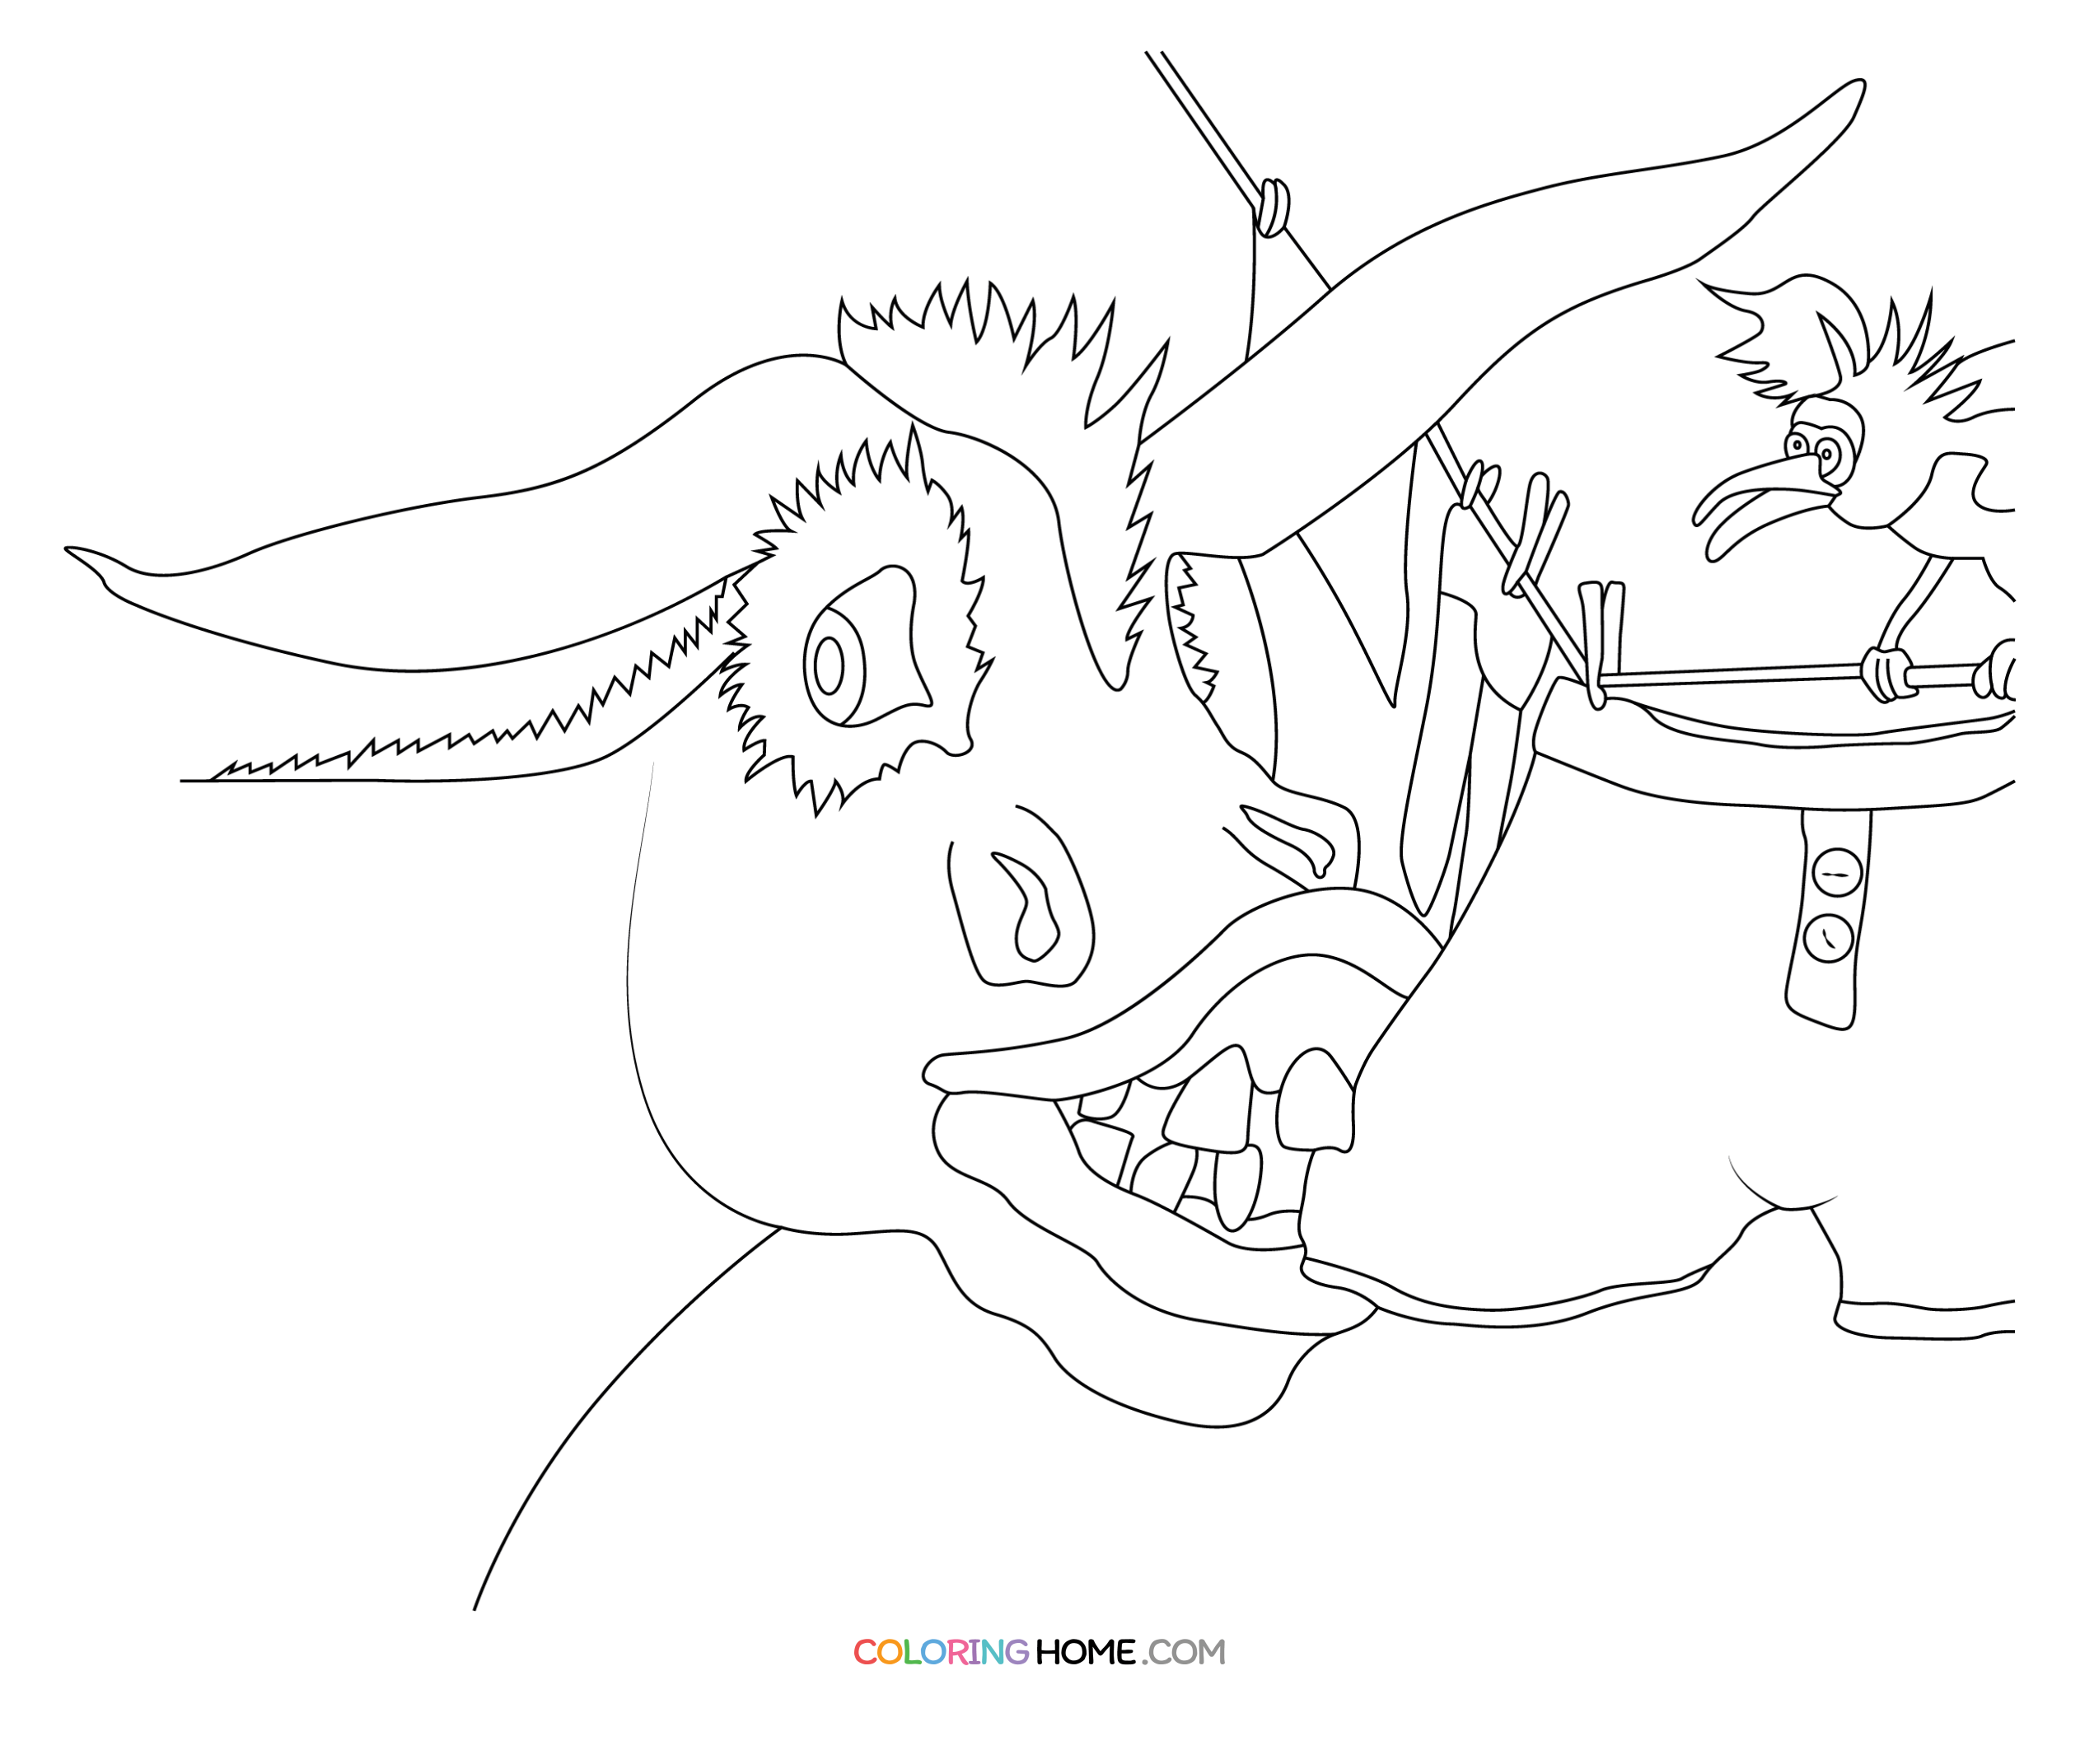 The Wonky Donkey getting up to mischief coloring page